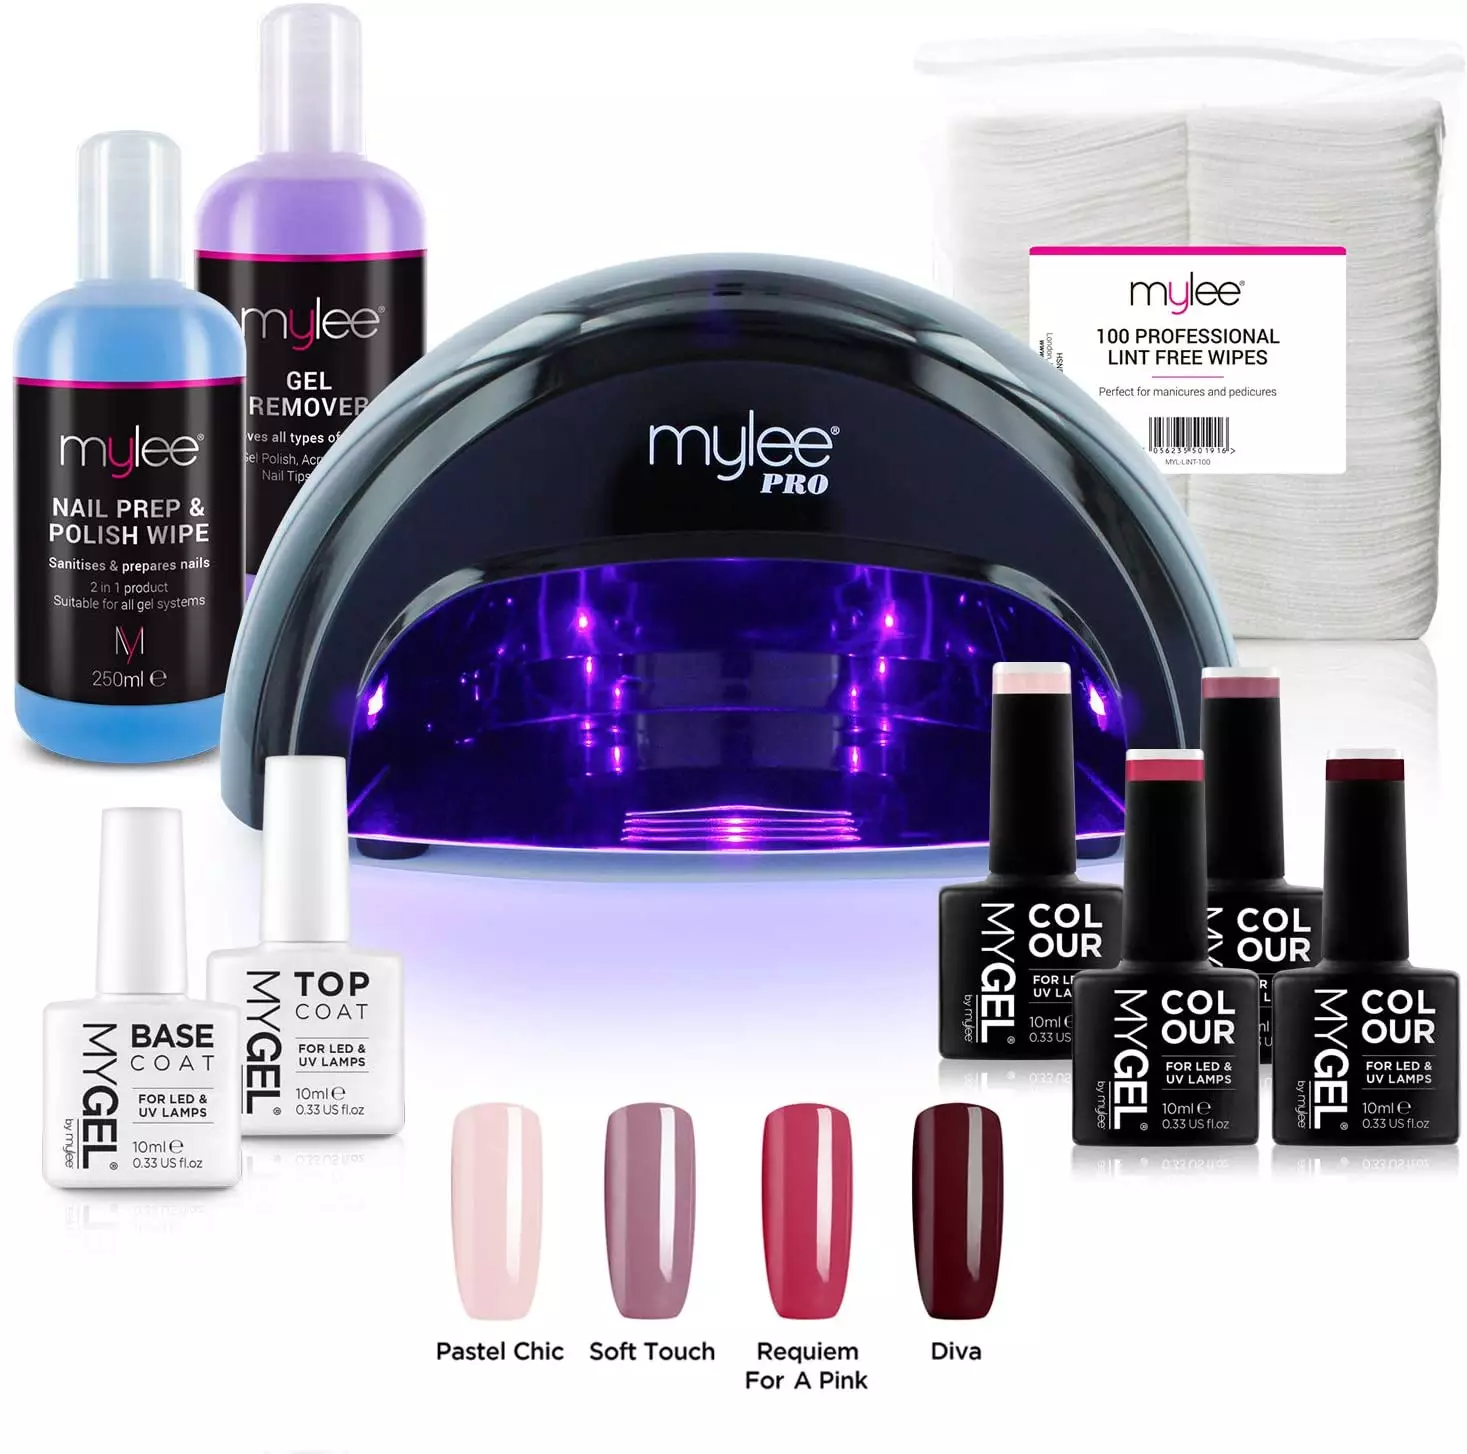 Mylee's Gel Nail Kit comes with everything you need for a salon-quality mani (